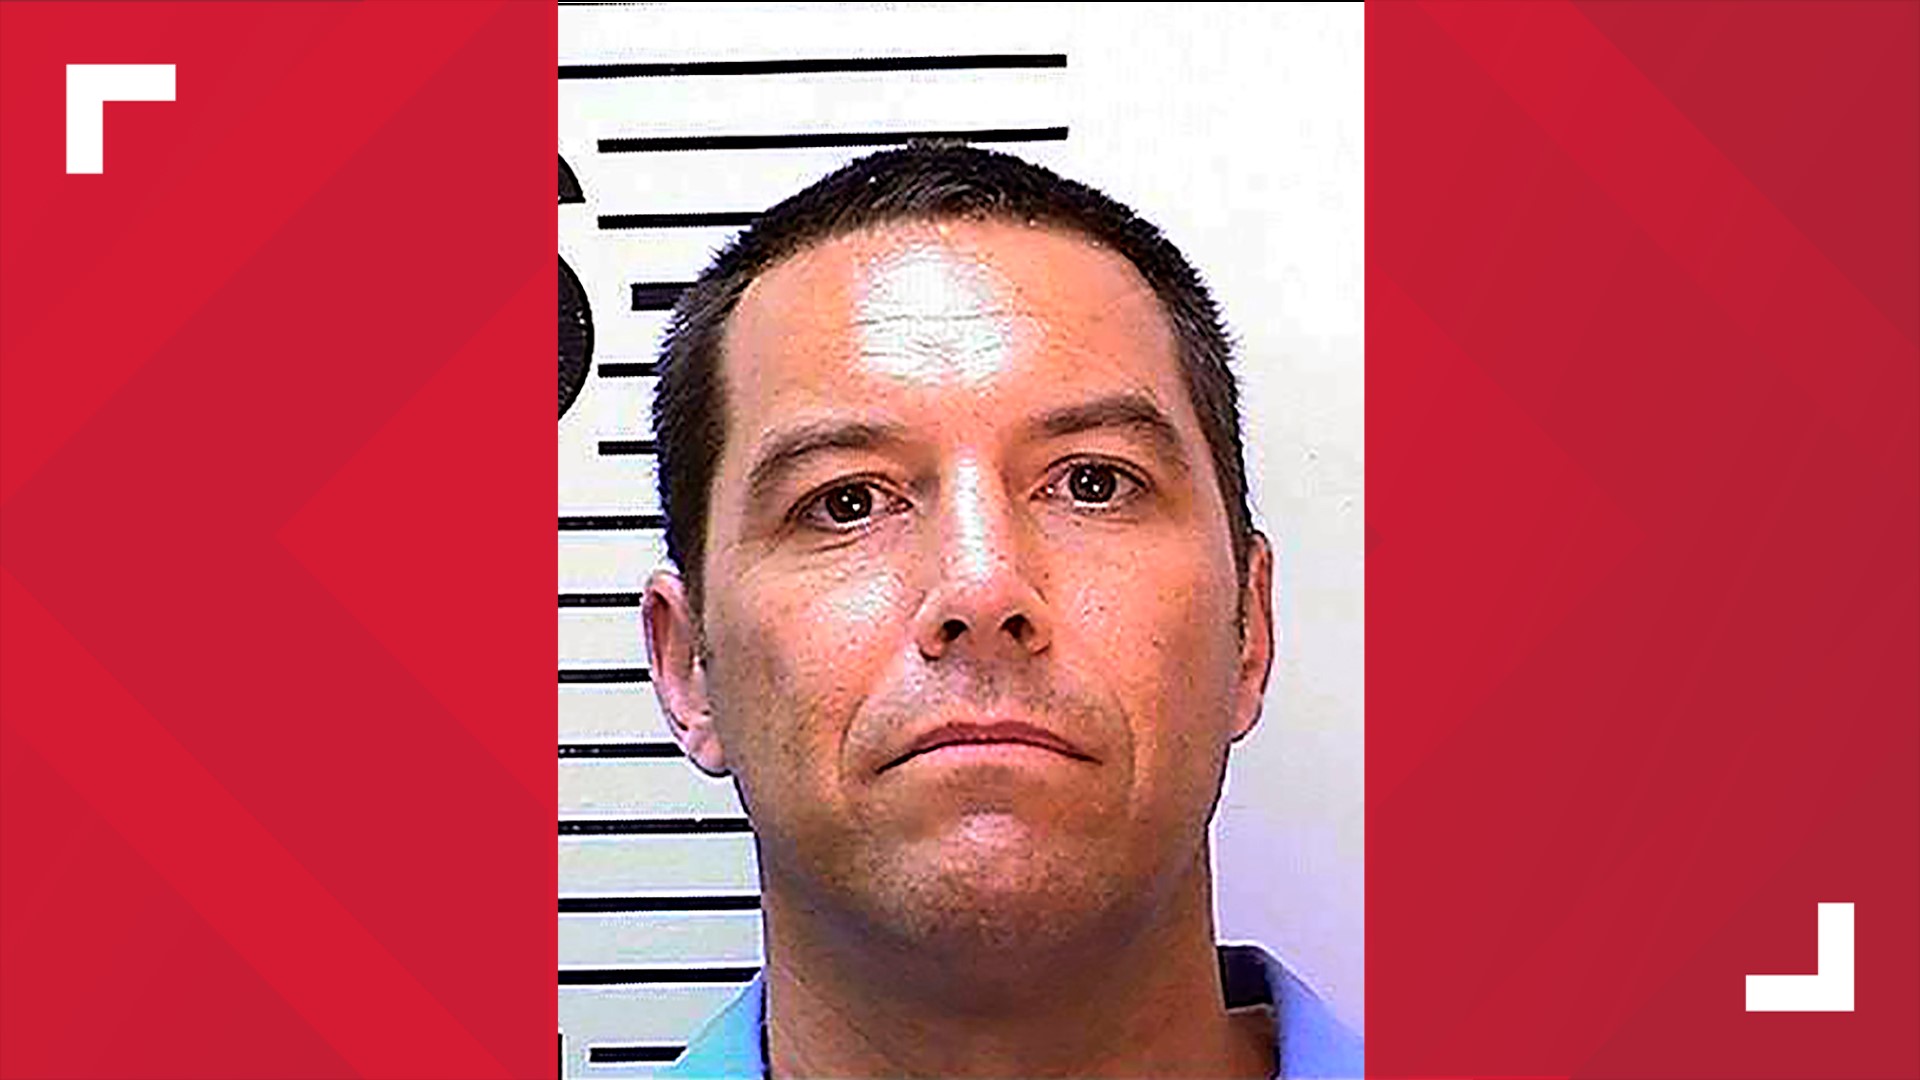 A judge says she plans to re-sentence Scott Peterson. Gov. Newsom signs privacy laws for abortion patients.